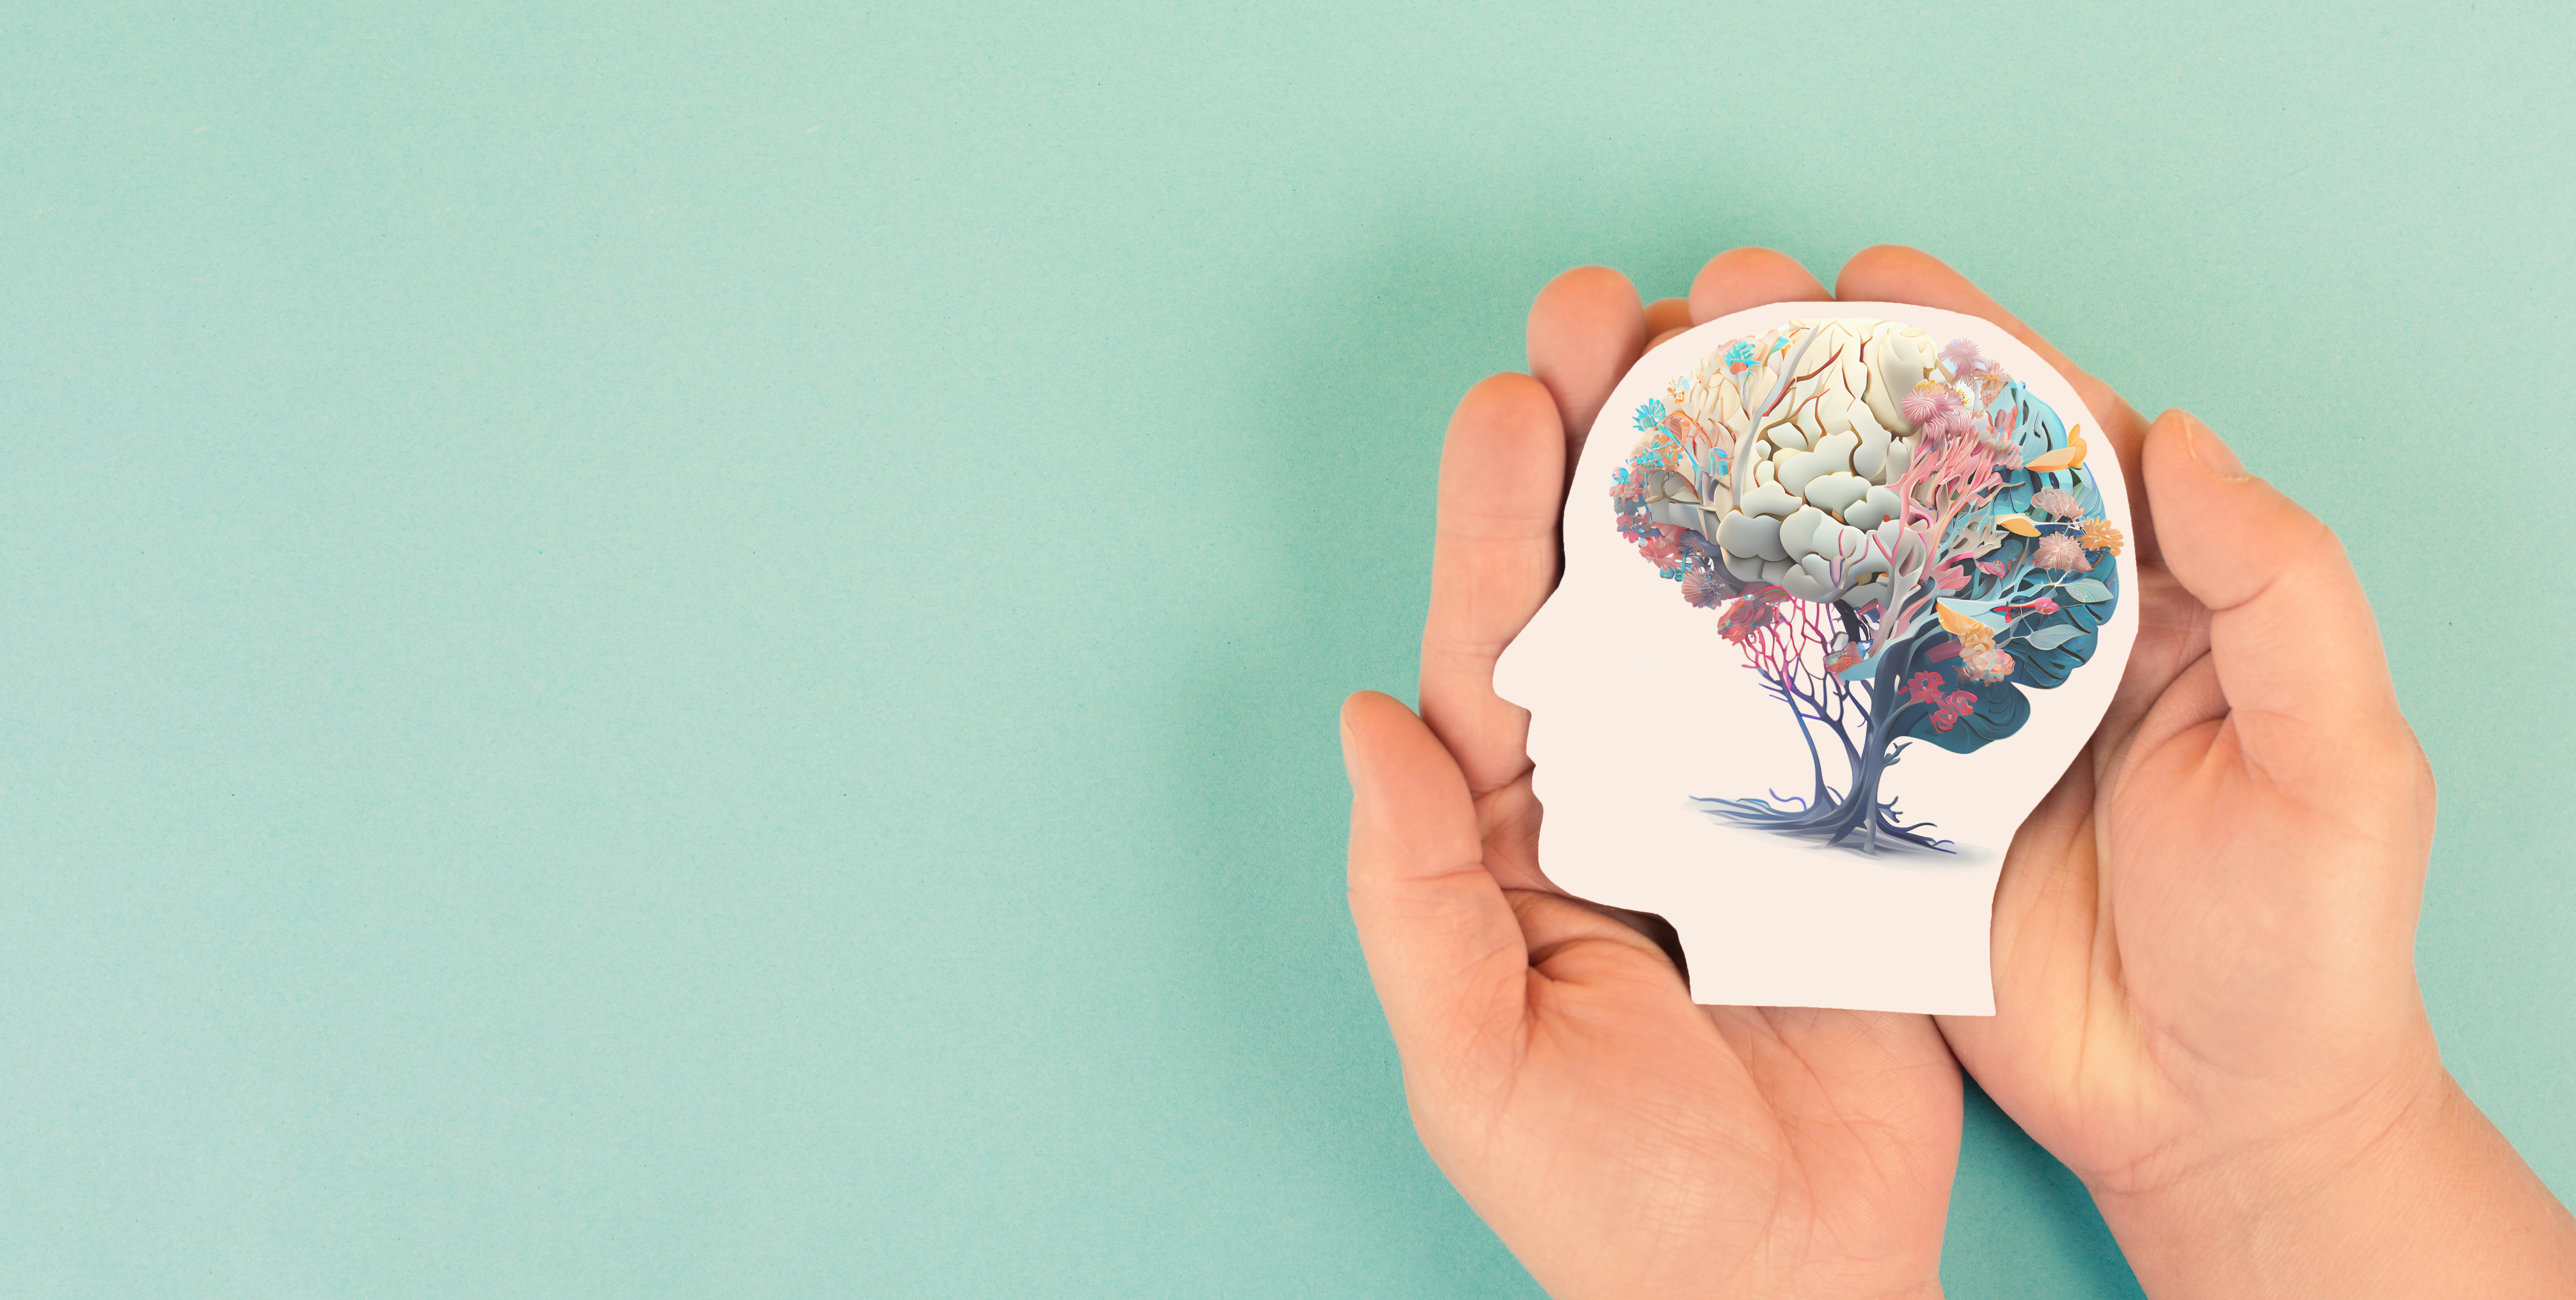 A pair of hands are seen holding a paper cutout of a human head with an illustration on it of a human brain as a tree.